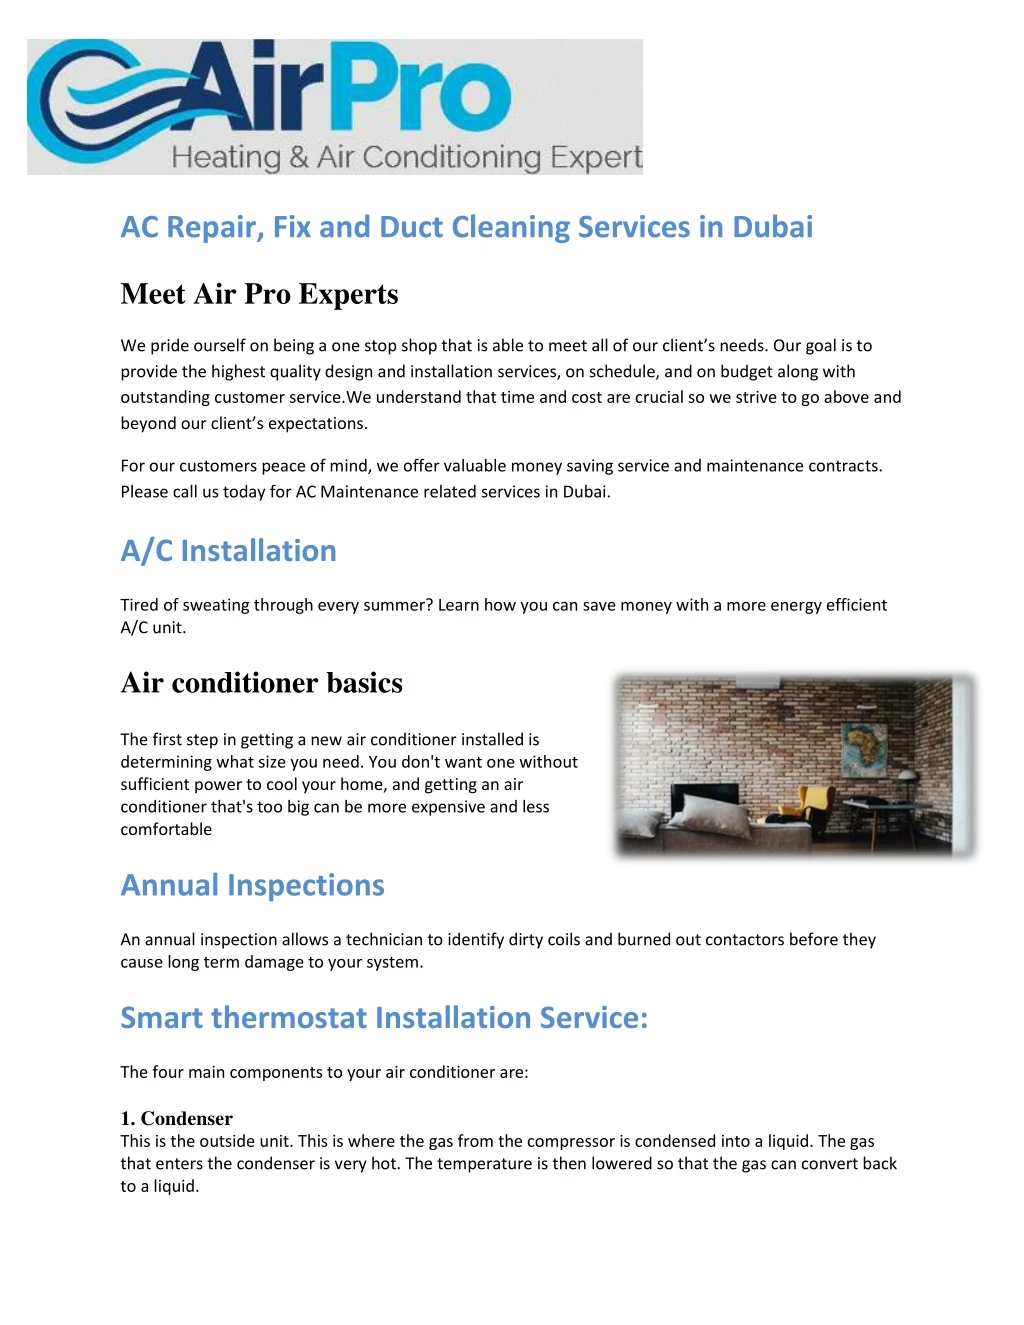 ac repair fix and duct cleaning services in dubai